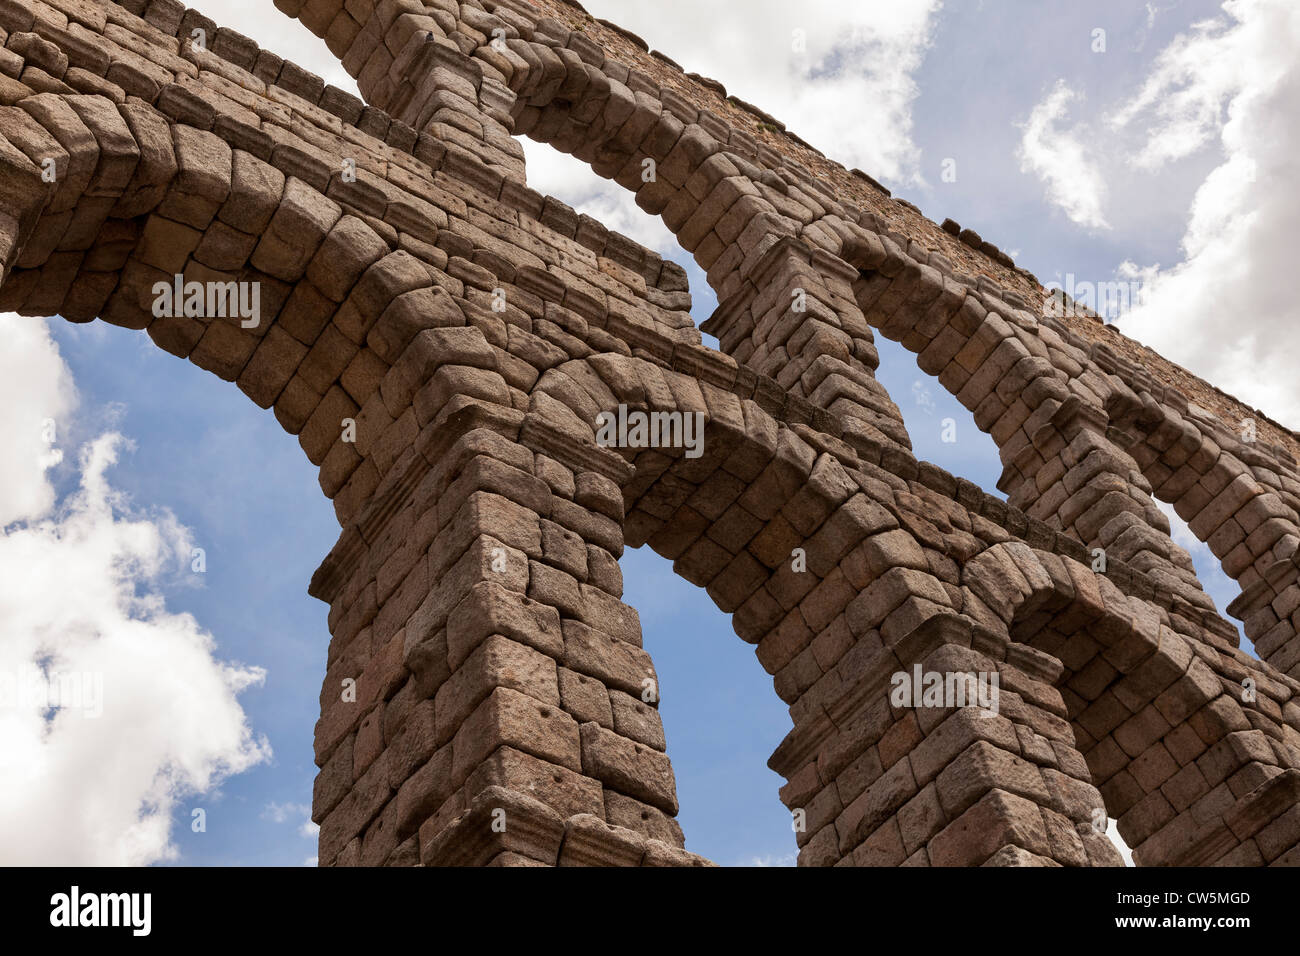 Roman aqueduct, Segovia, Spain, Europe. View of this stunning famous symbol of this UNESCO World Heritage Site. Stock Photo